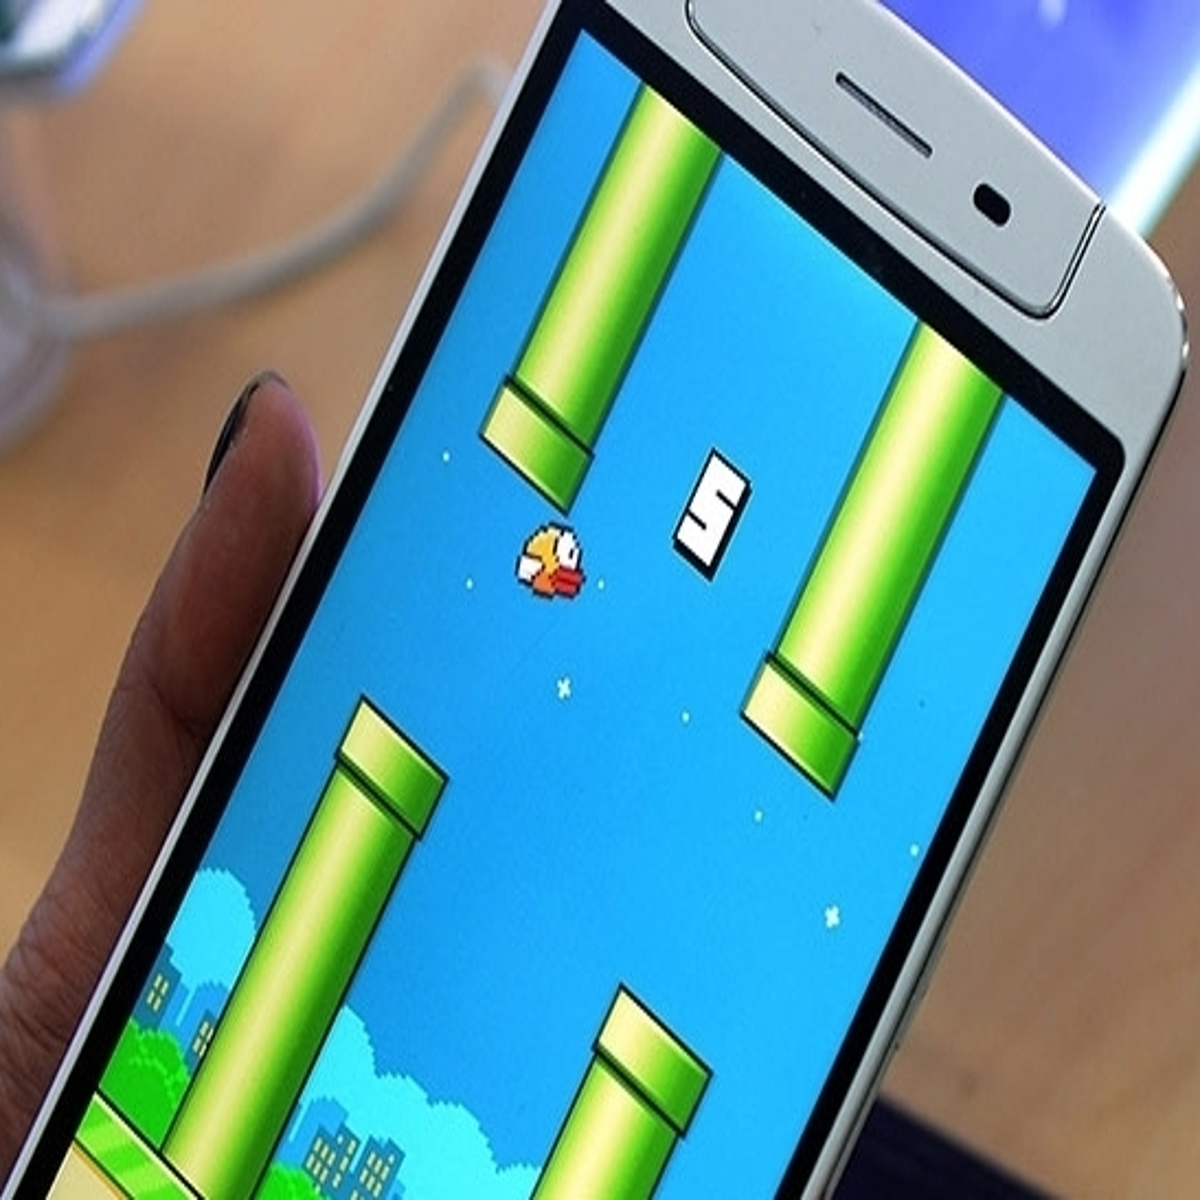 A Look at Flappy Bird, The Game That Shook the World